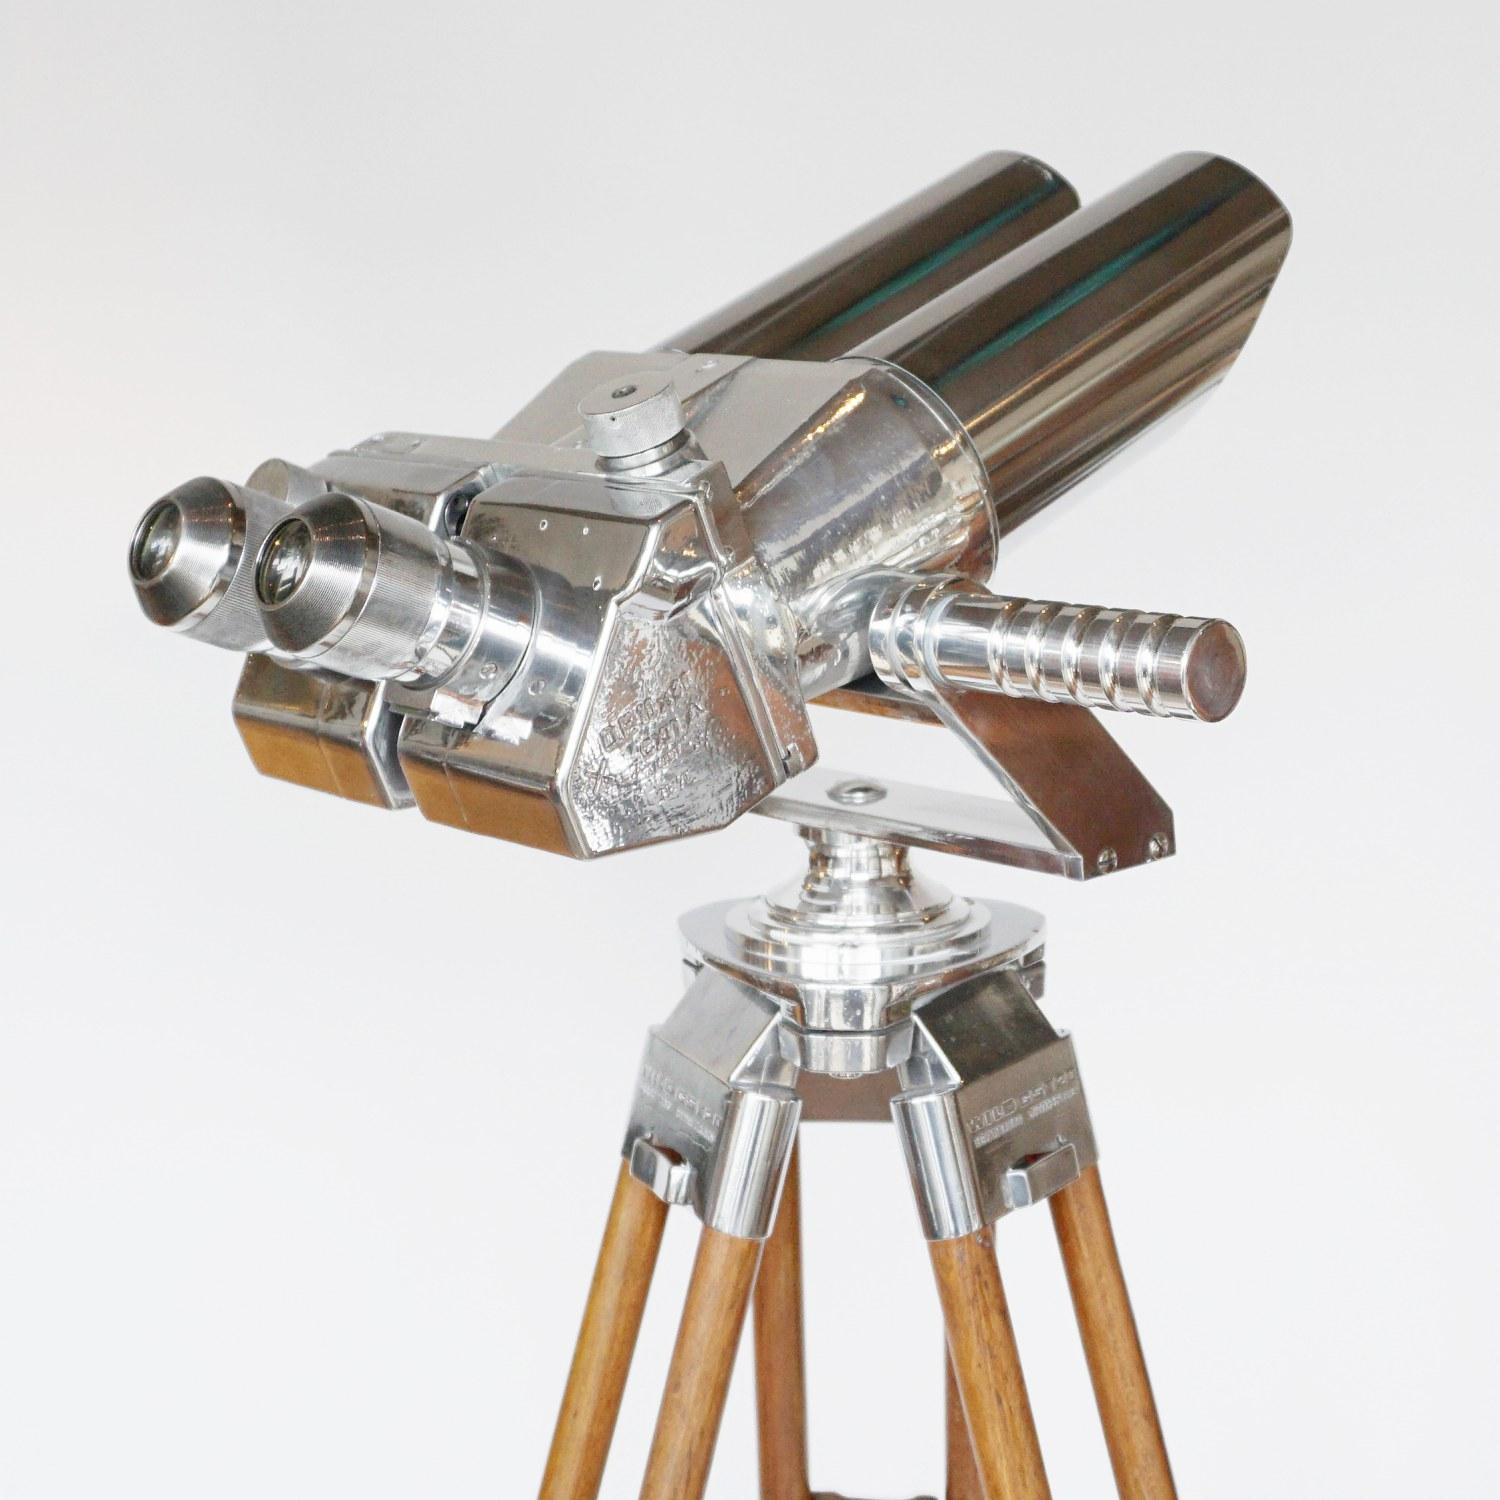 Fuji Meibo 15 x 80 marine binoculars on later extending wood and chromed metal stand with chromed conical feet. 15X magnification with 80m objective lens. 

Numbered 6526.

Stamped Fuji Meibo and numbered. 

Dimensions: H 50cm W 21cm Length